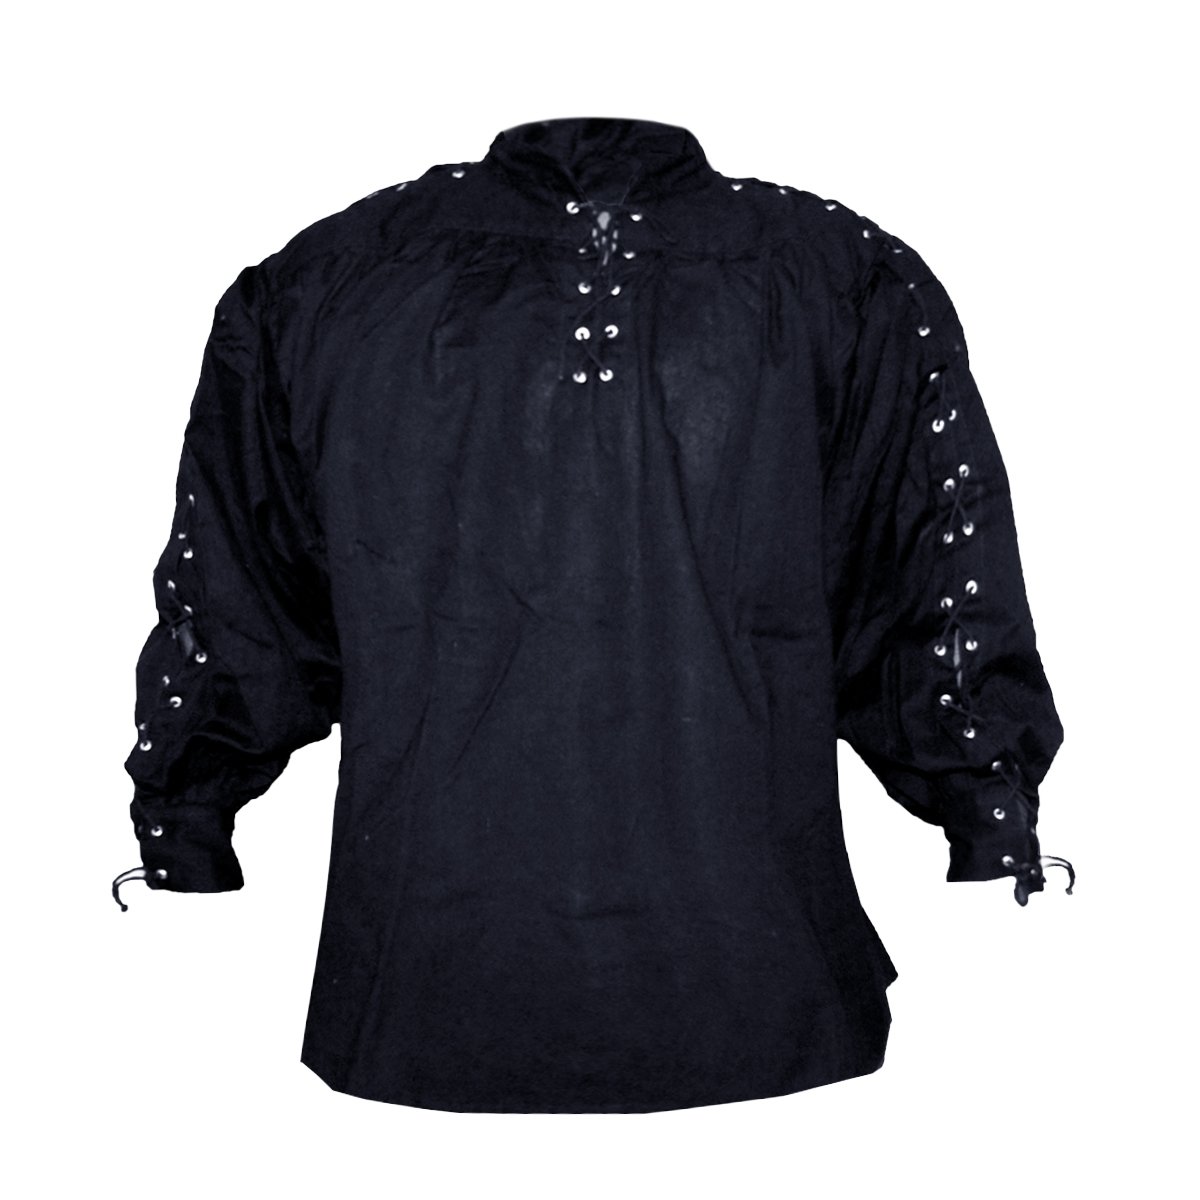 Collarless cotton shirt (laced neck & sleeves) - black, size L